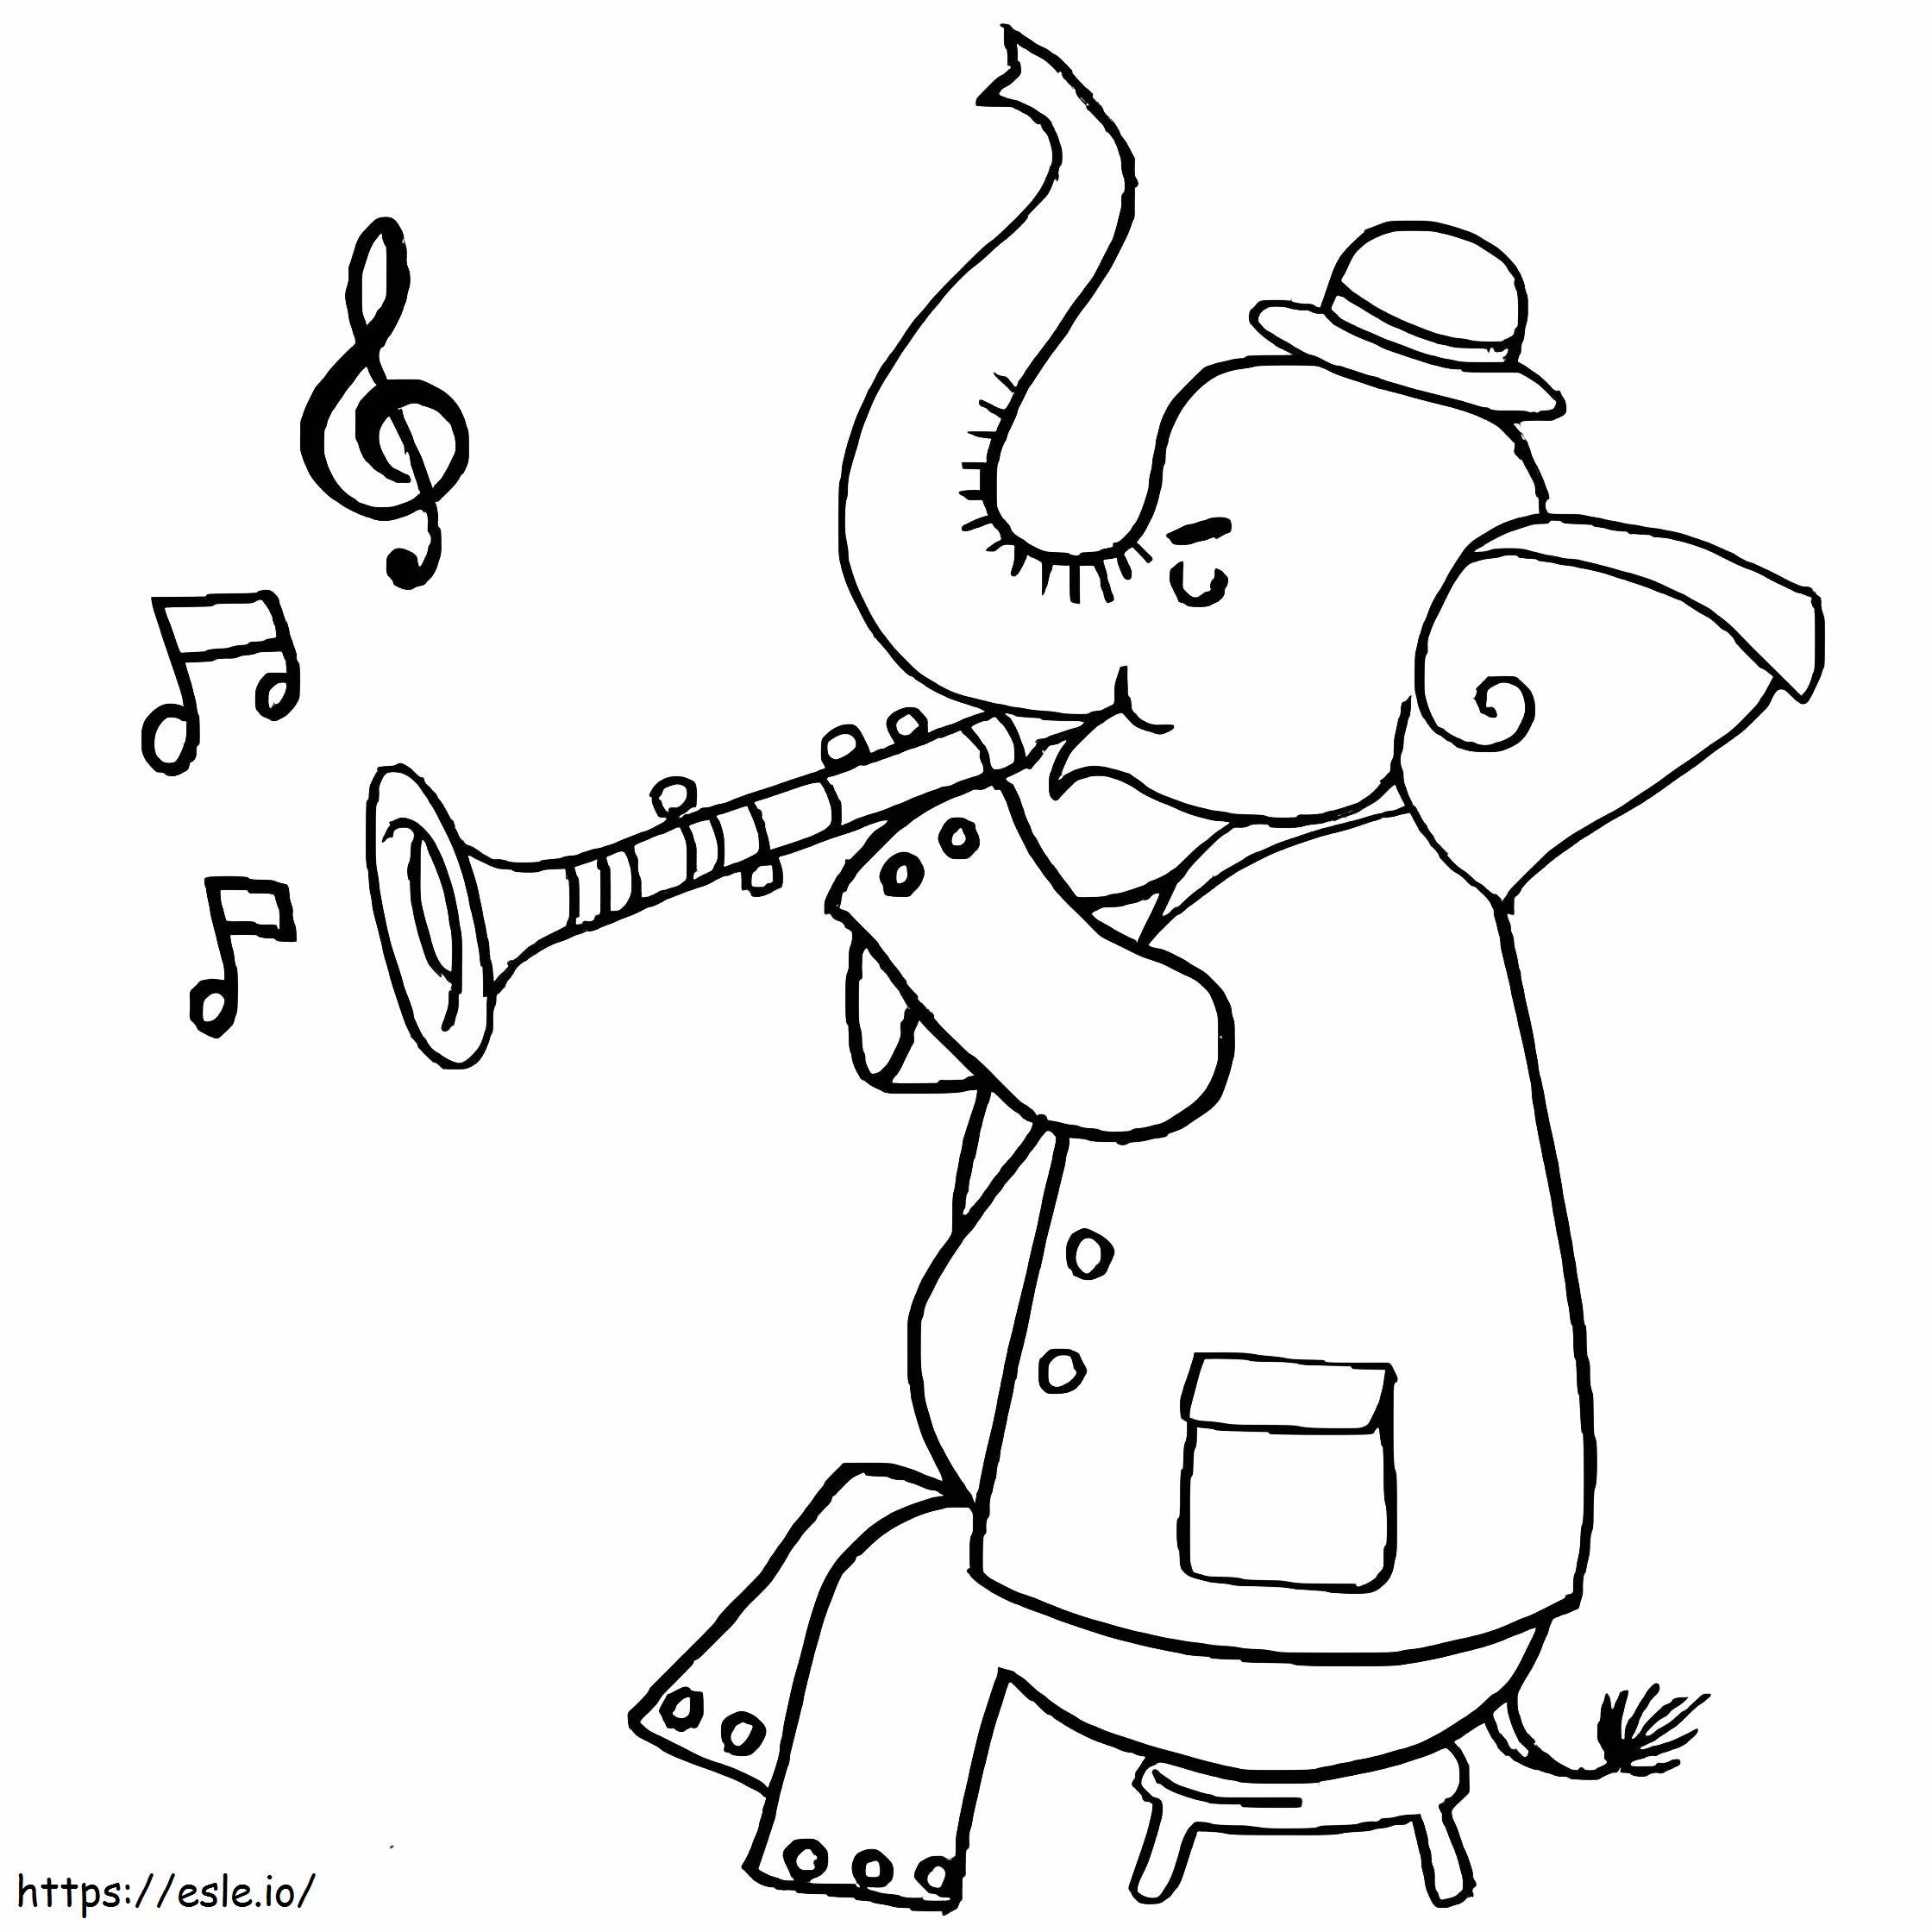 Elephant Playing Clarinet coloring page